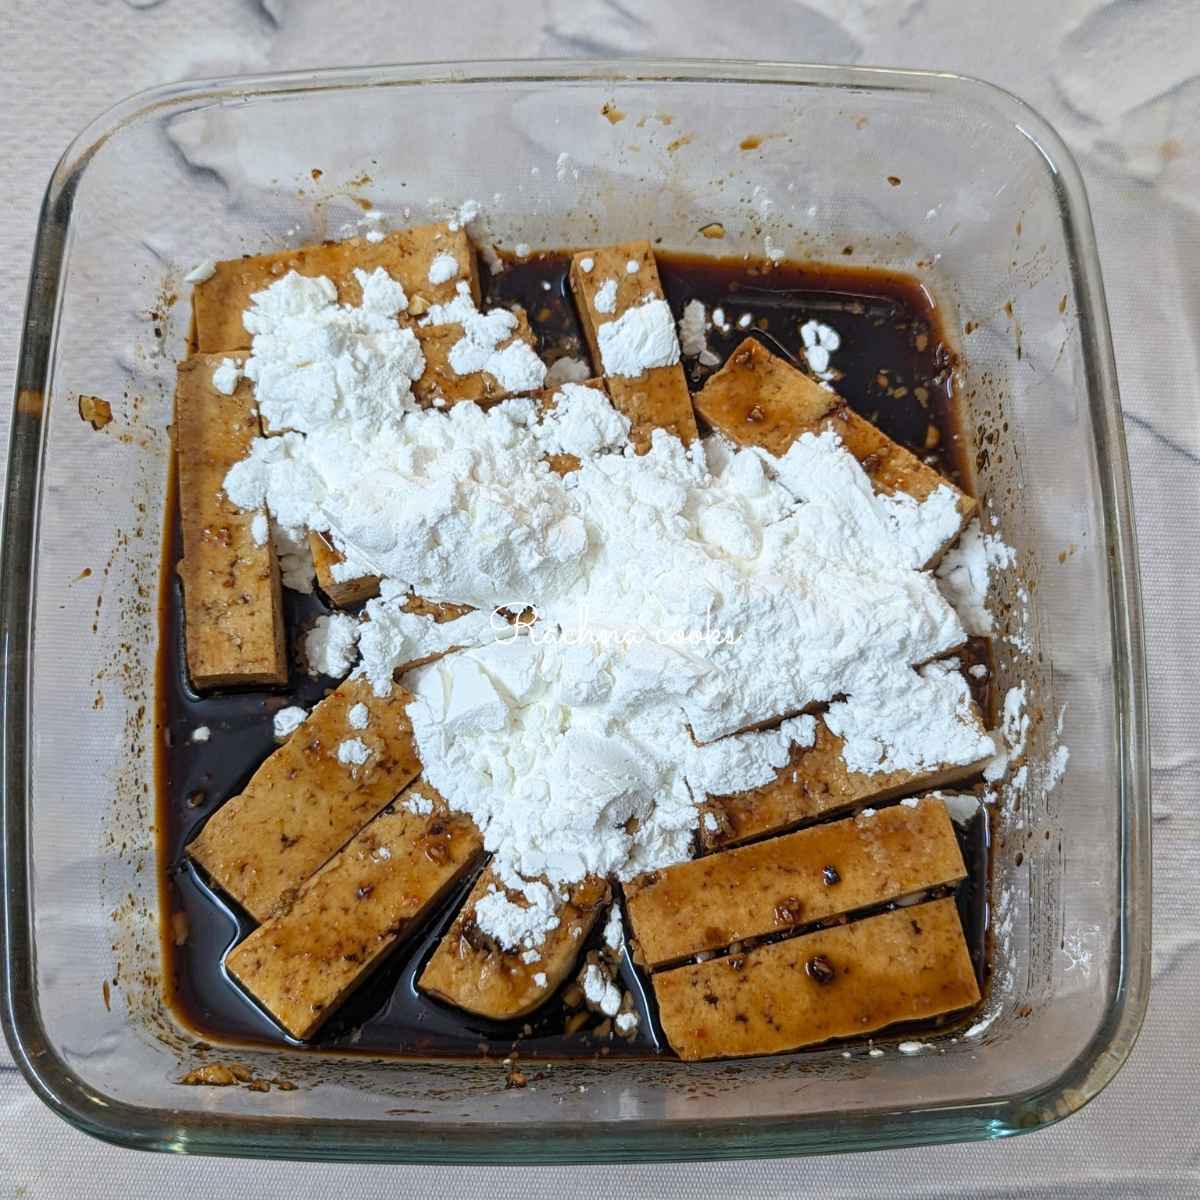 Tofu fries with cornstarch after marination in a bowl